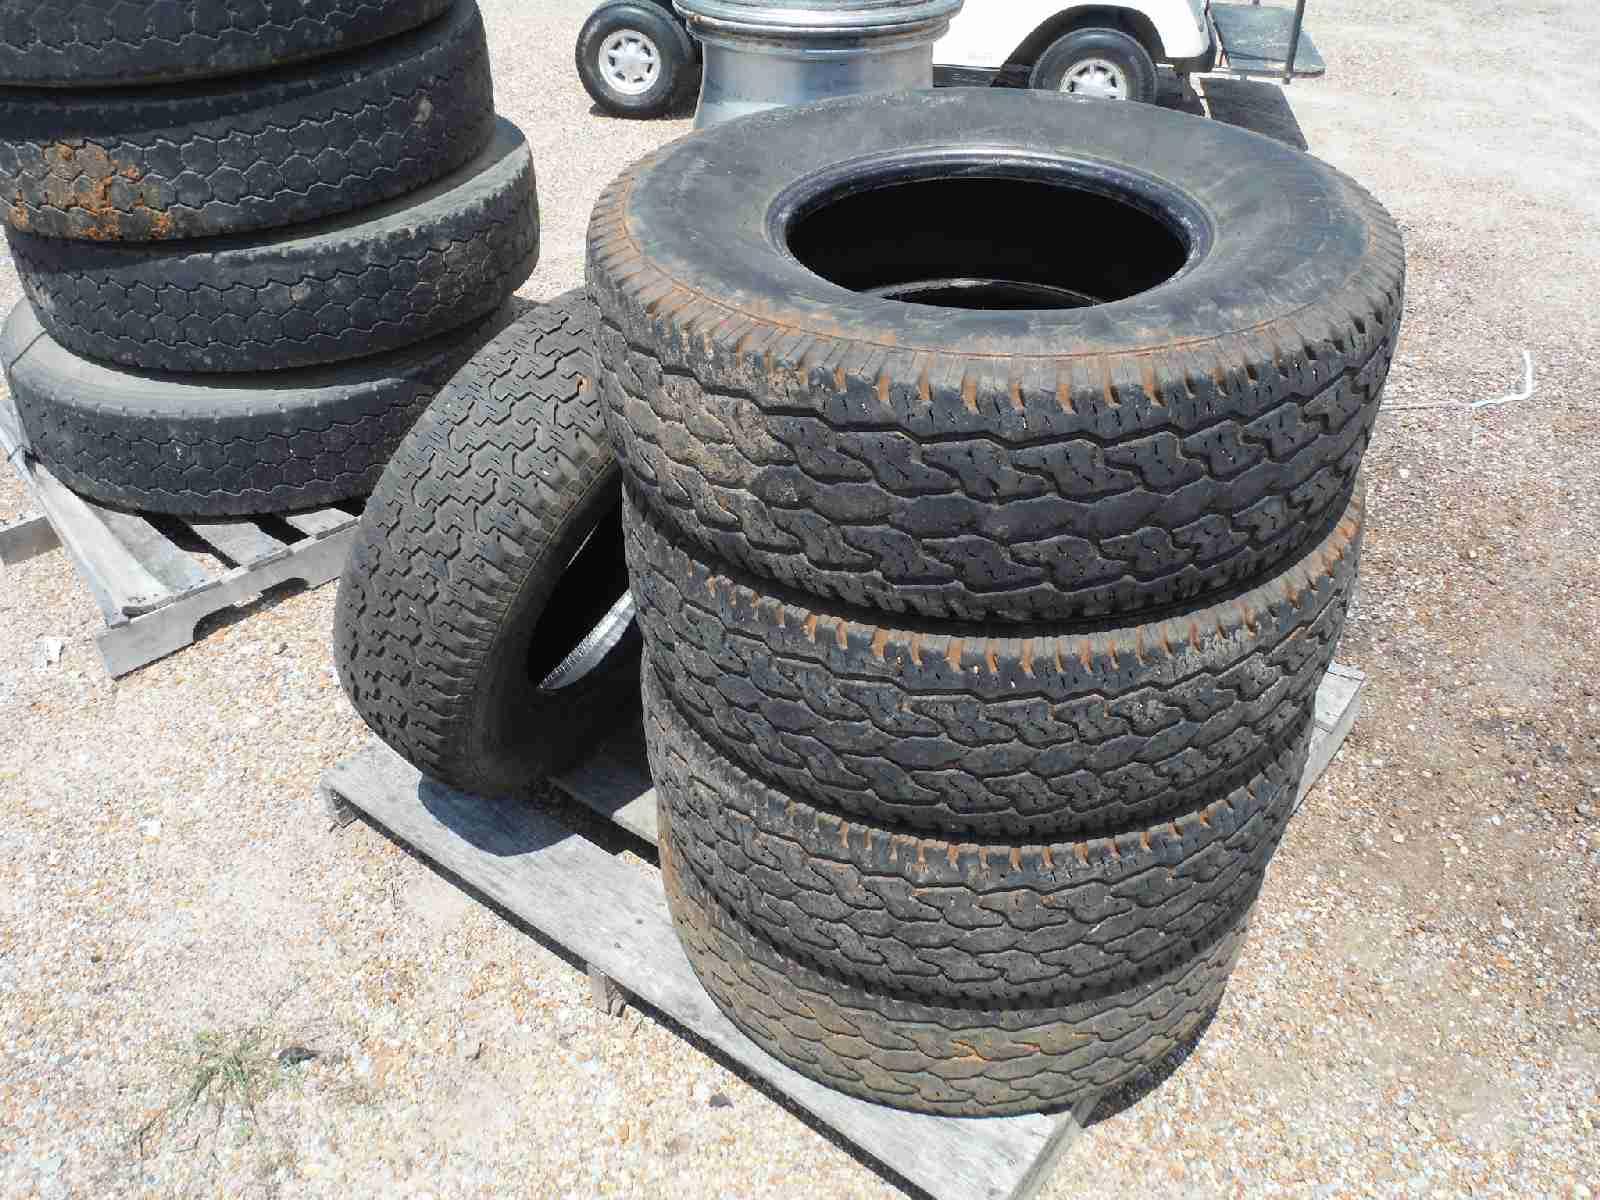 (4) Dayton Timberline 31x50-15 Tires and (1) Goodyear Wrangler P235/75R15 T